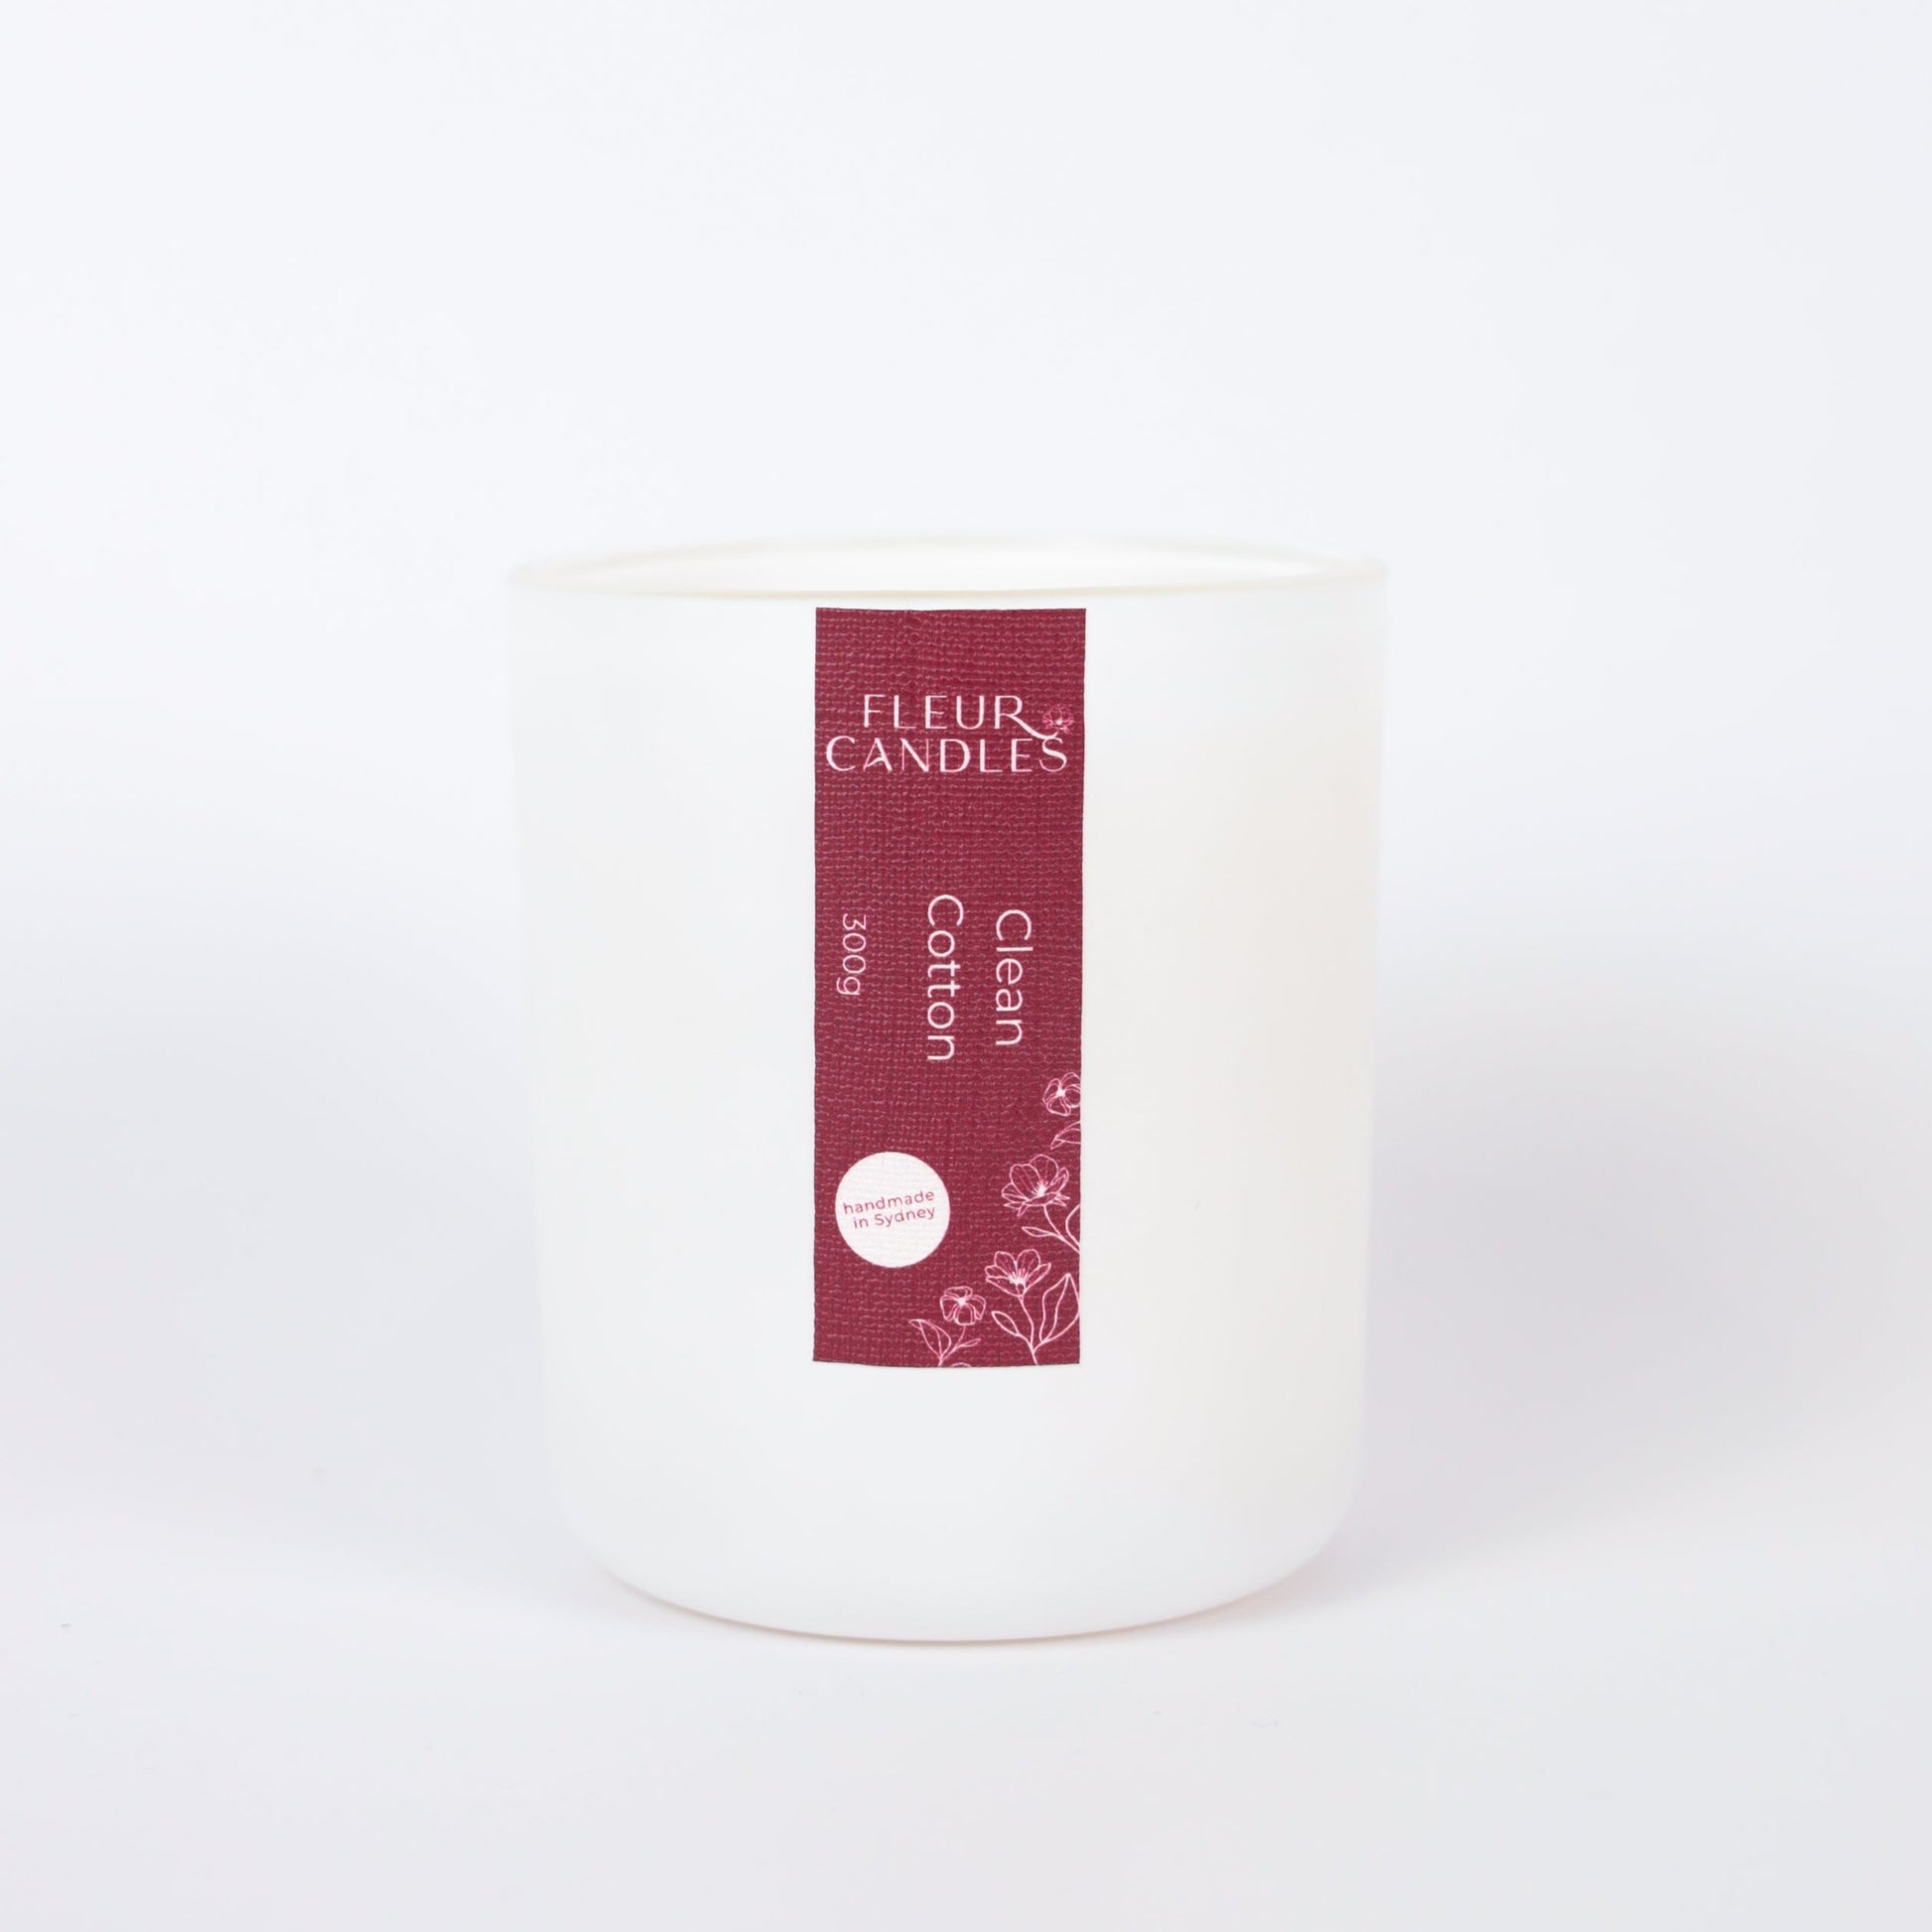 white candle with burgundy label on a white background. fragrance is "clean cotton"